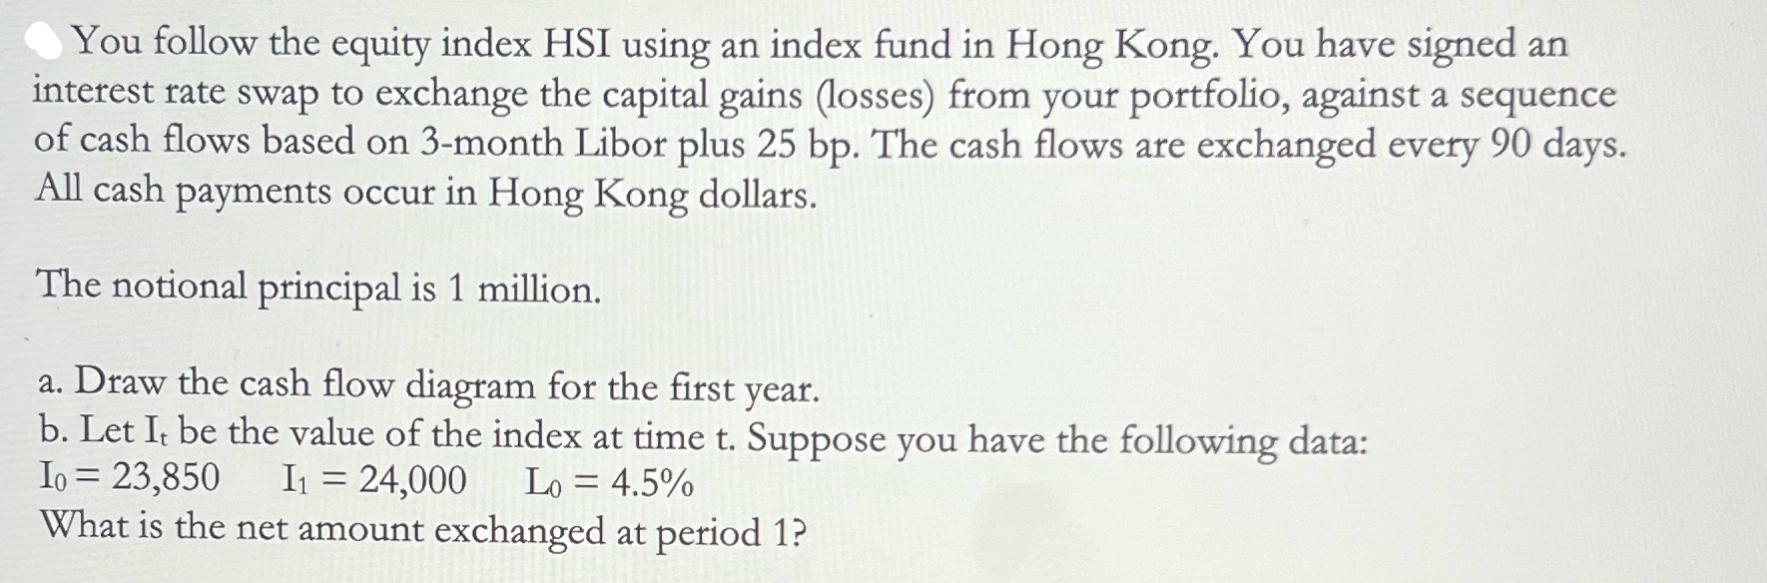 You follow the equity index HSI using an index fund in Hong Kong. You have signed an interest rate swap to